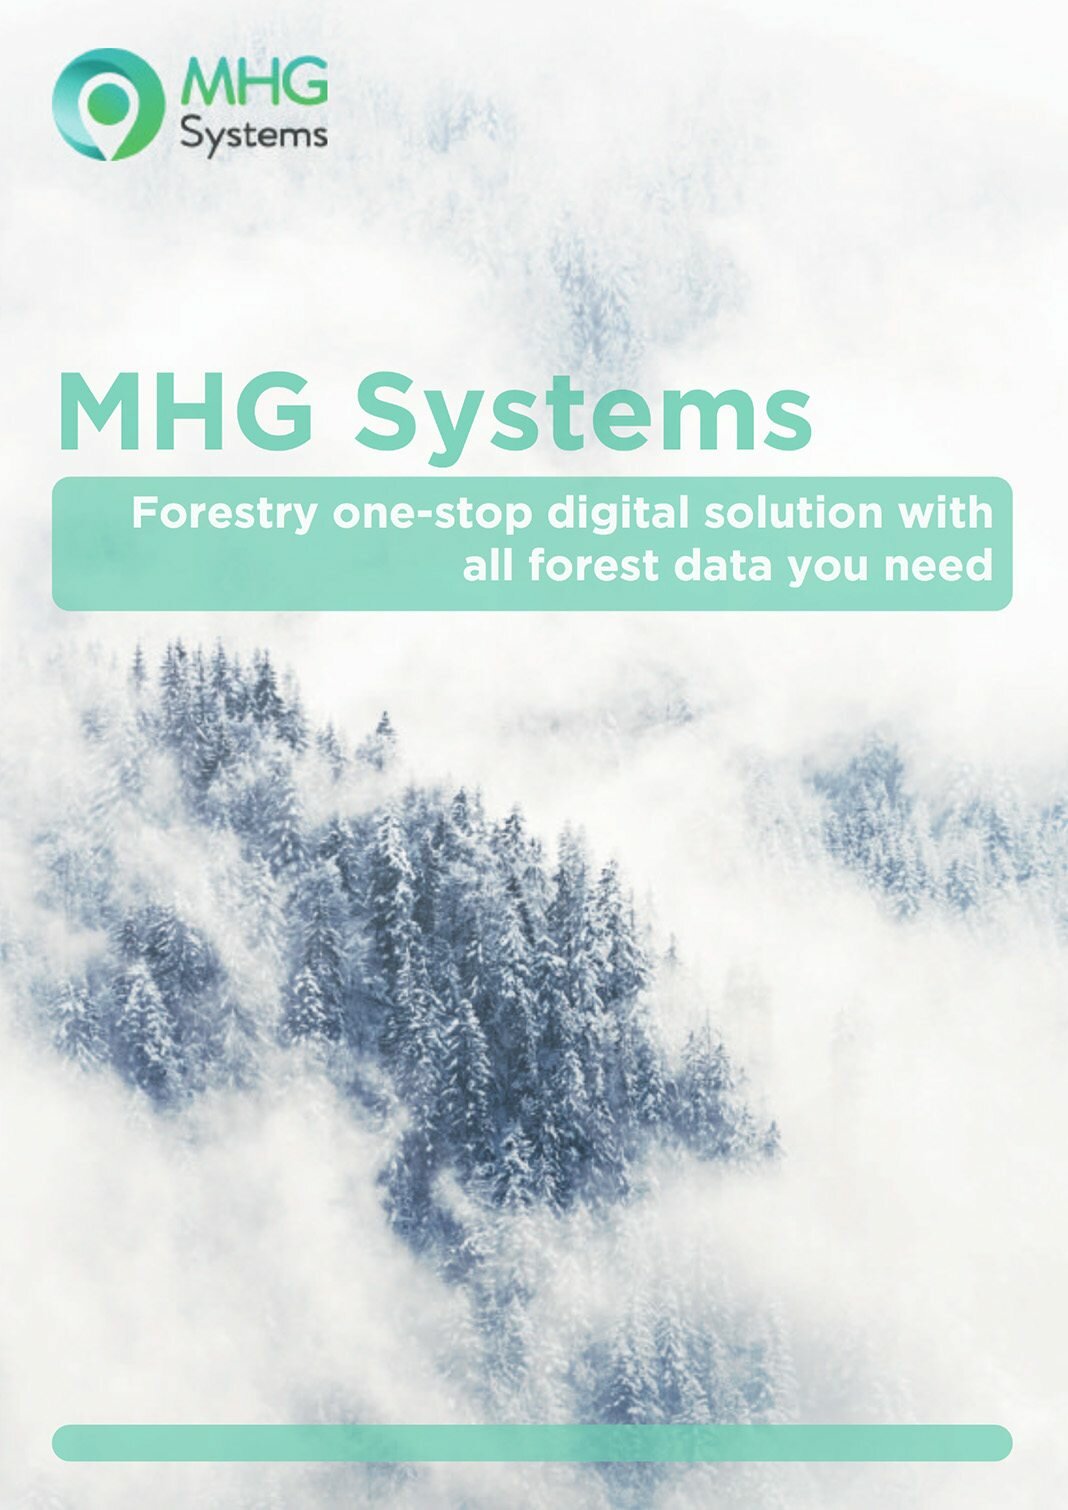 MHG Systems forest management